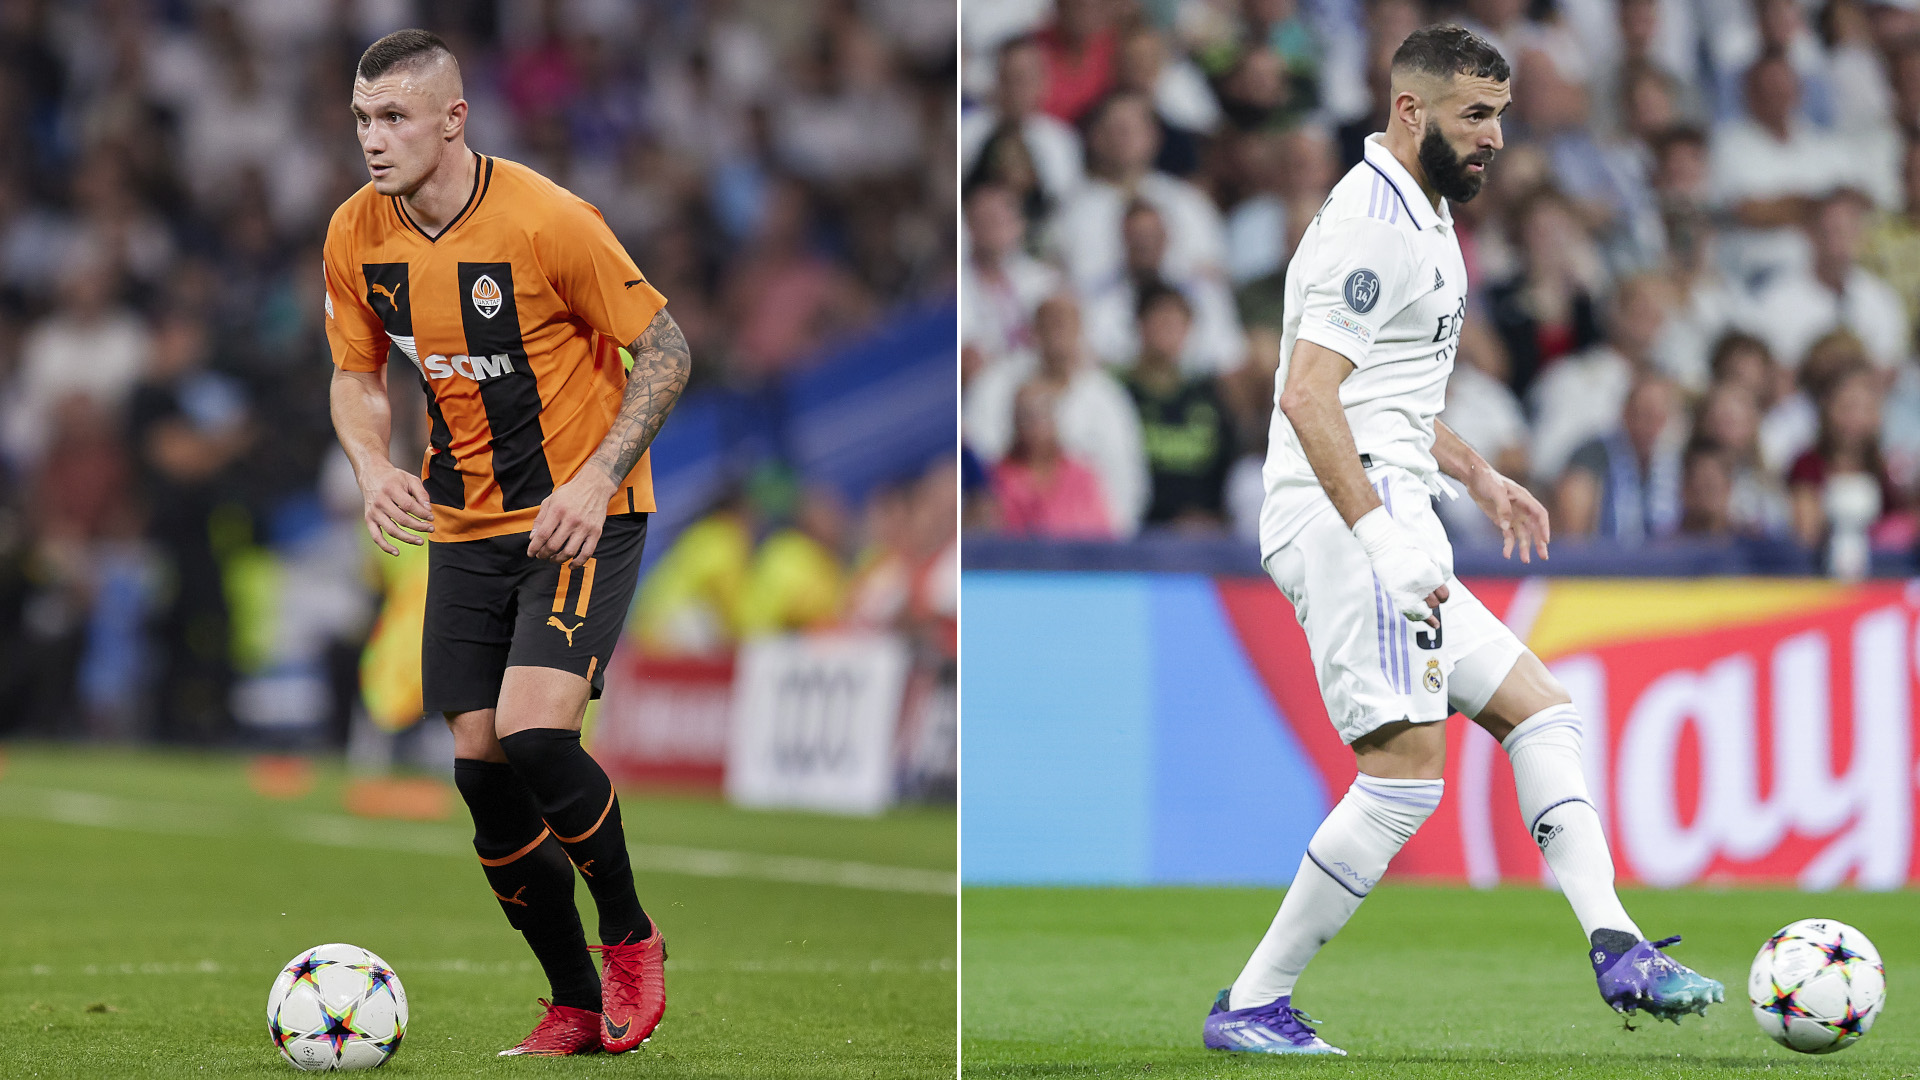 Shakhtar Donetsk vs Real Madrid live stream how to watch Champions League online and on TV, team news TechRadar